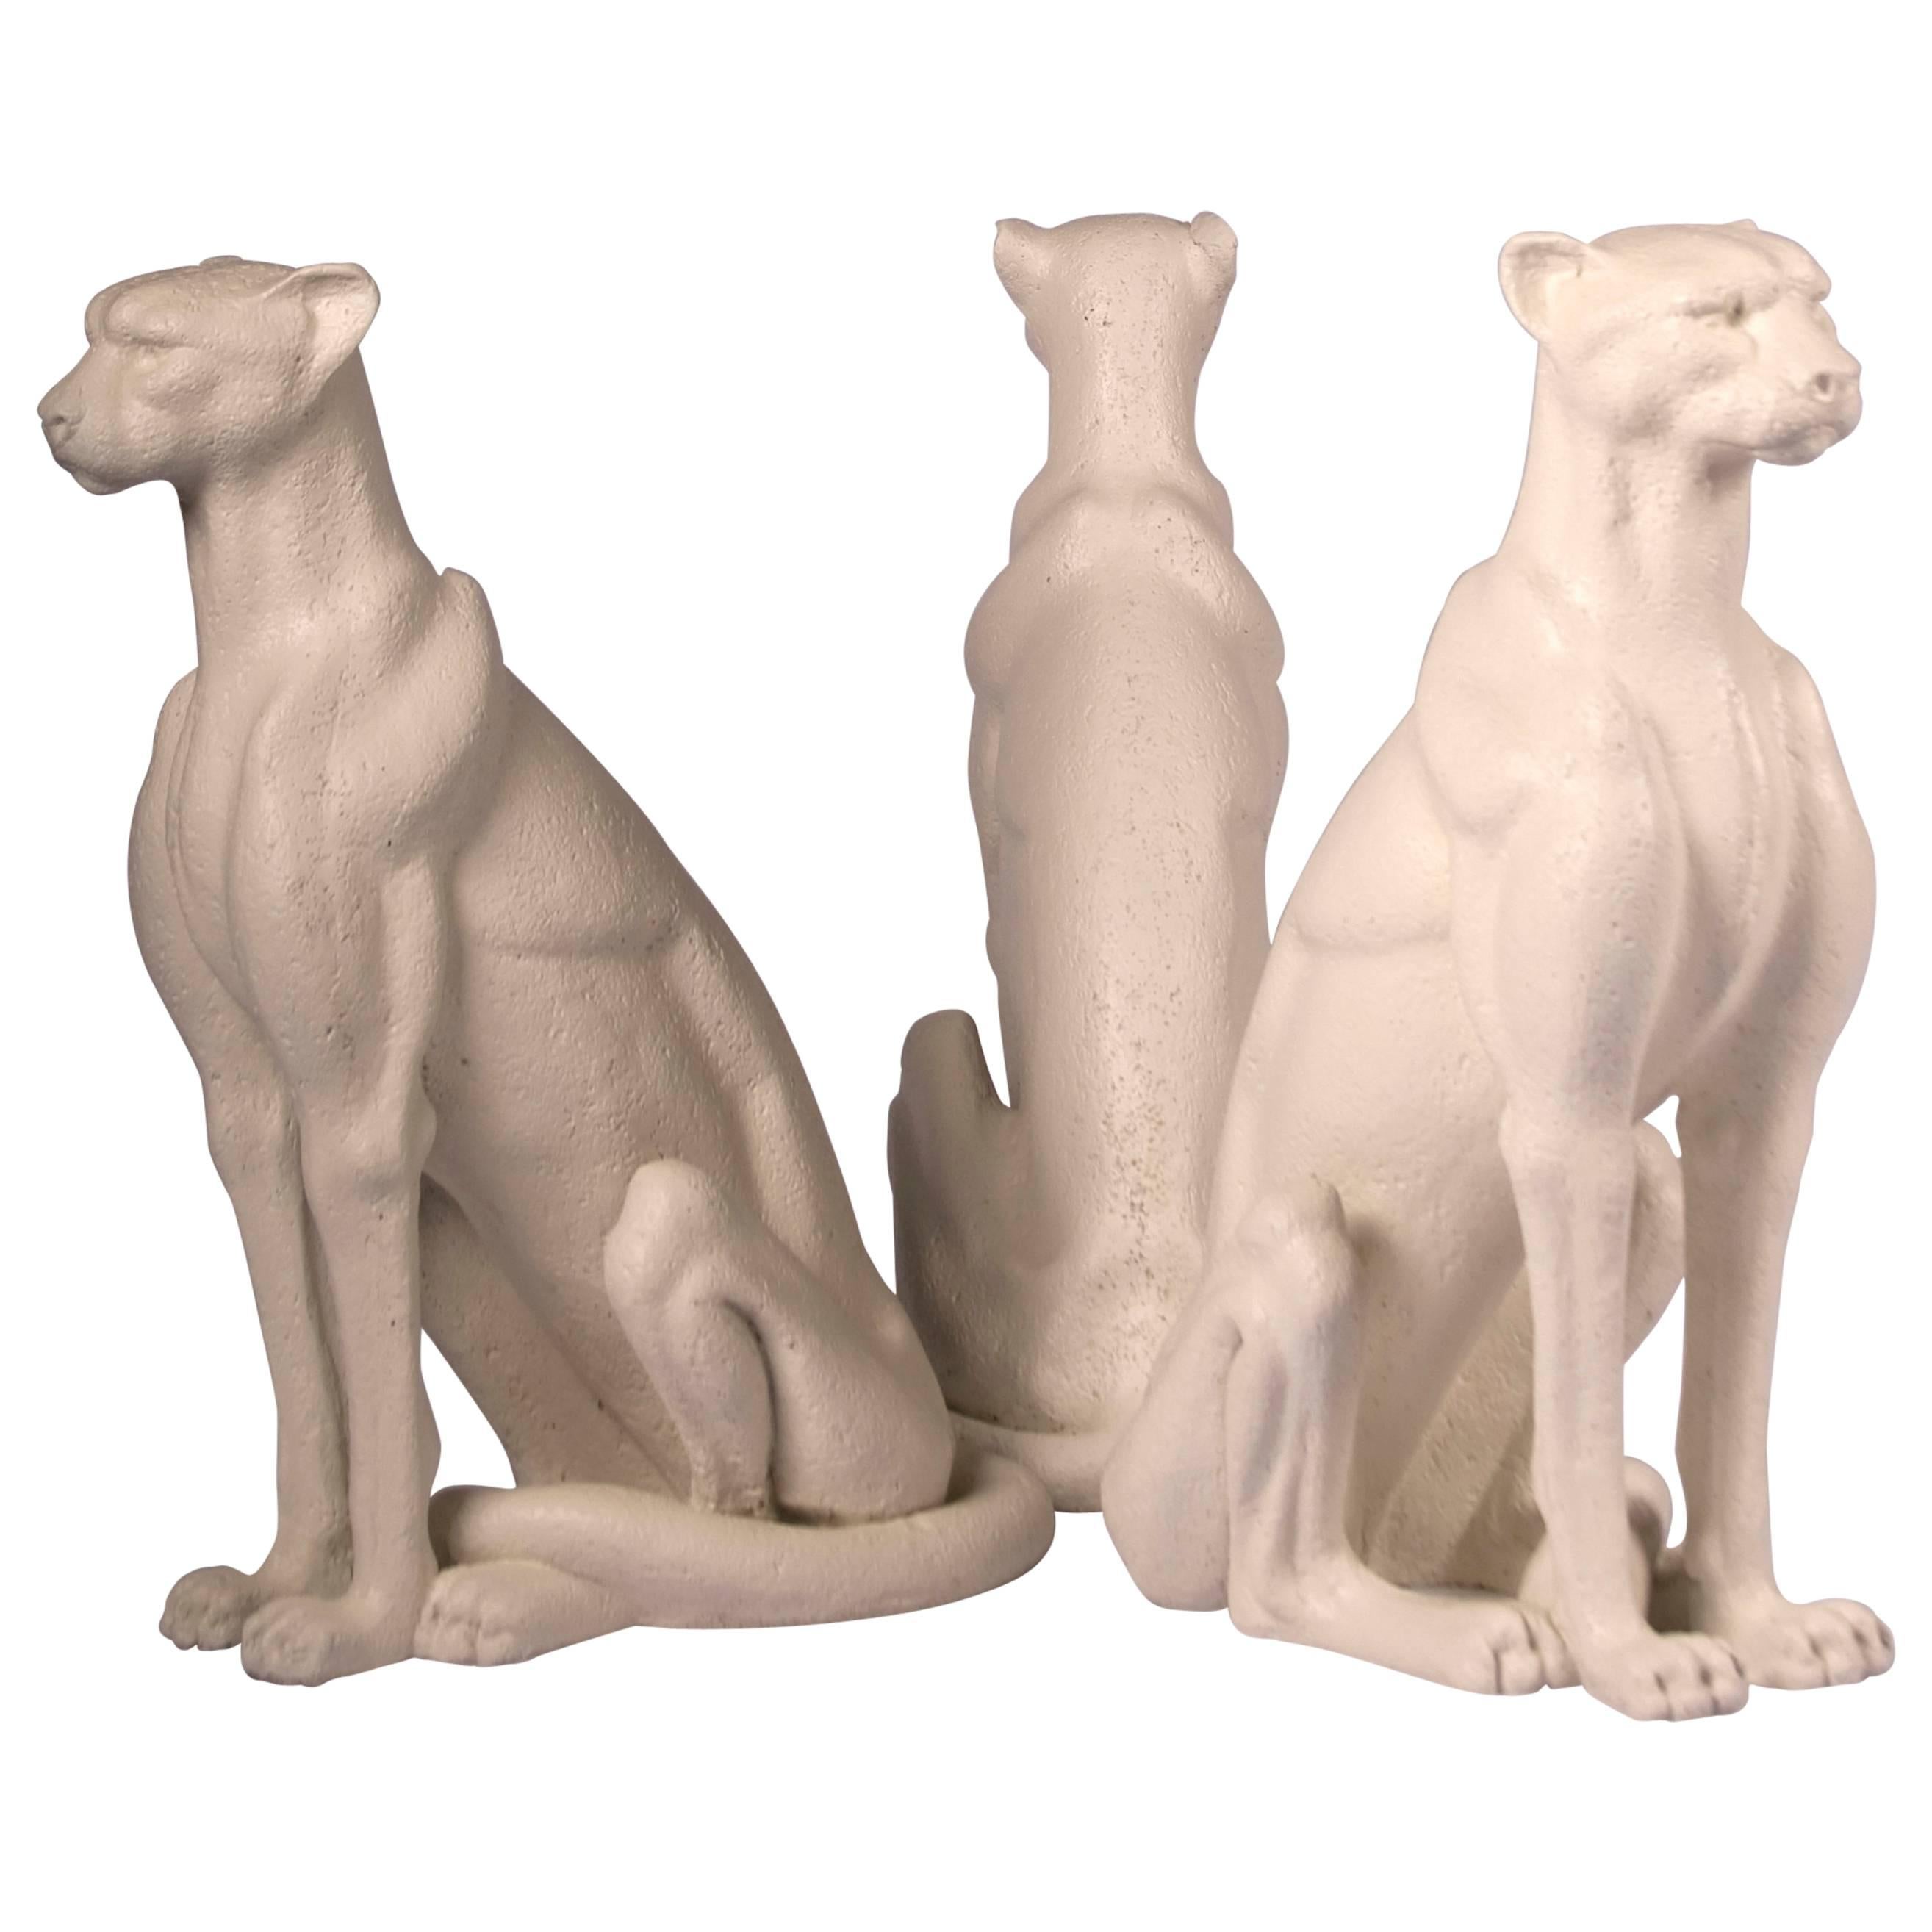 Dining Table Base, set of three faux limestone Cheetah Sculptures